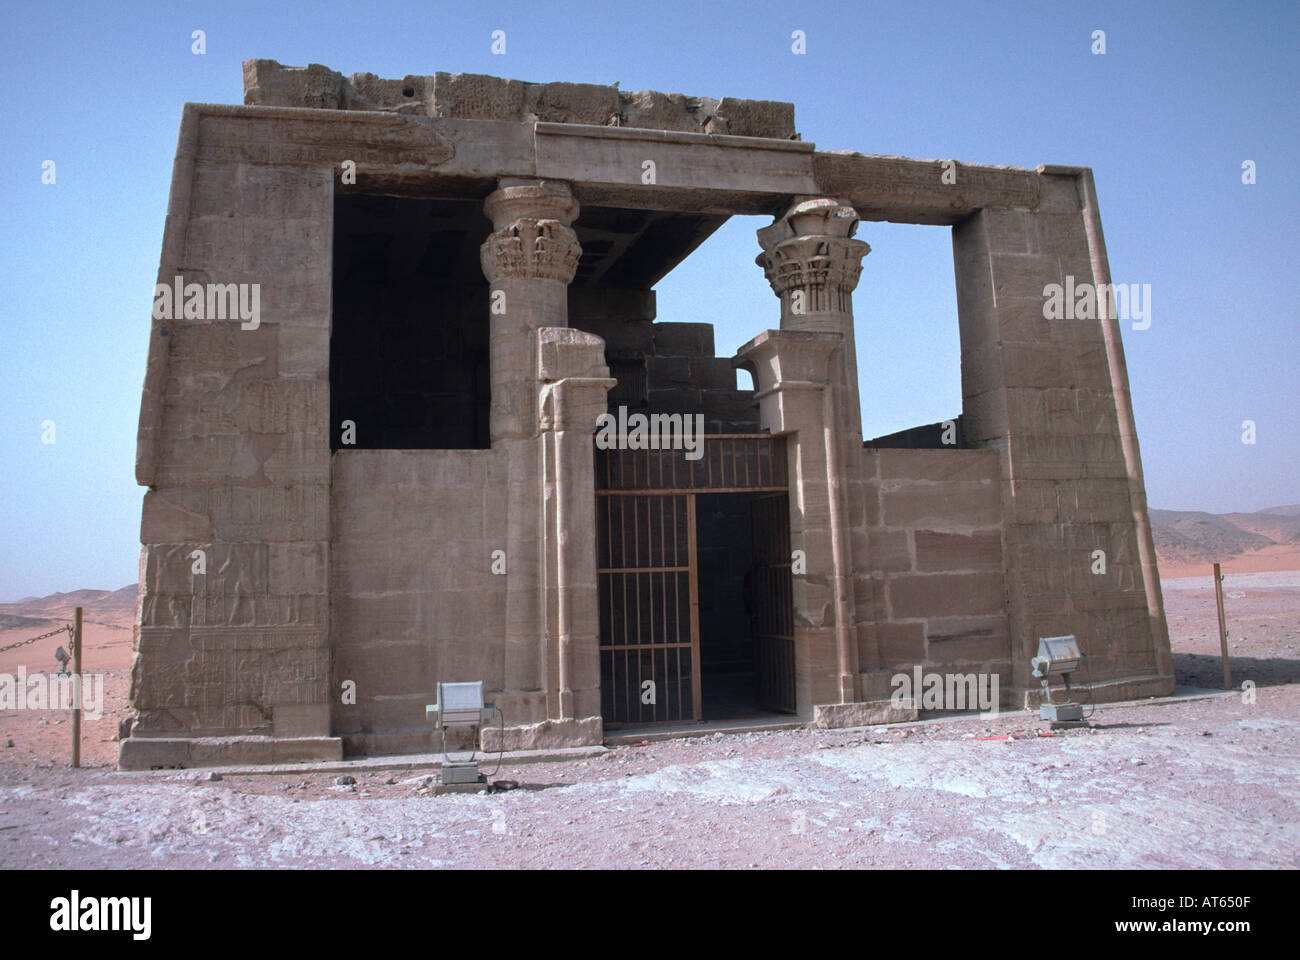 The temple of Dakka at New Sebua in Egypt.  . Dakka temple, New Sebua, Upper Egypt, Egypt. This temple was moved to saved it from the rising waters of Lake Nassar in the 1960s. Stock Photo